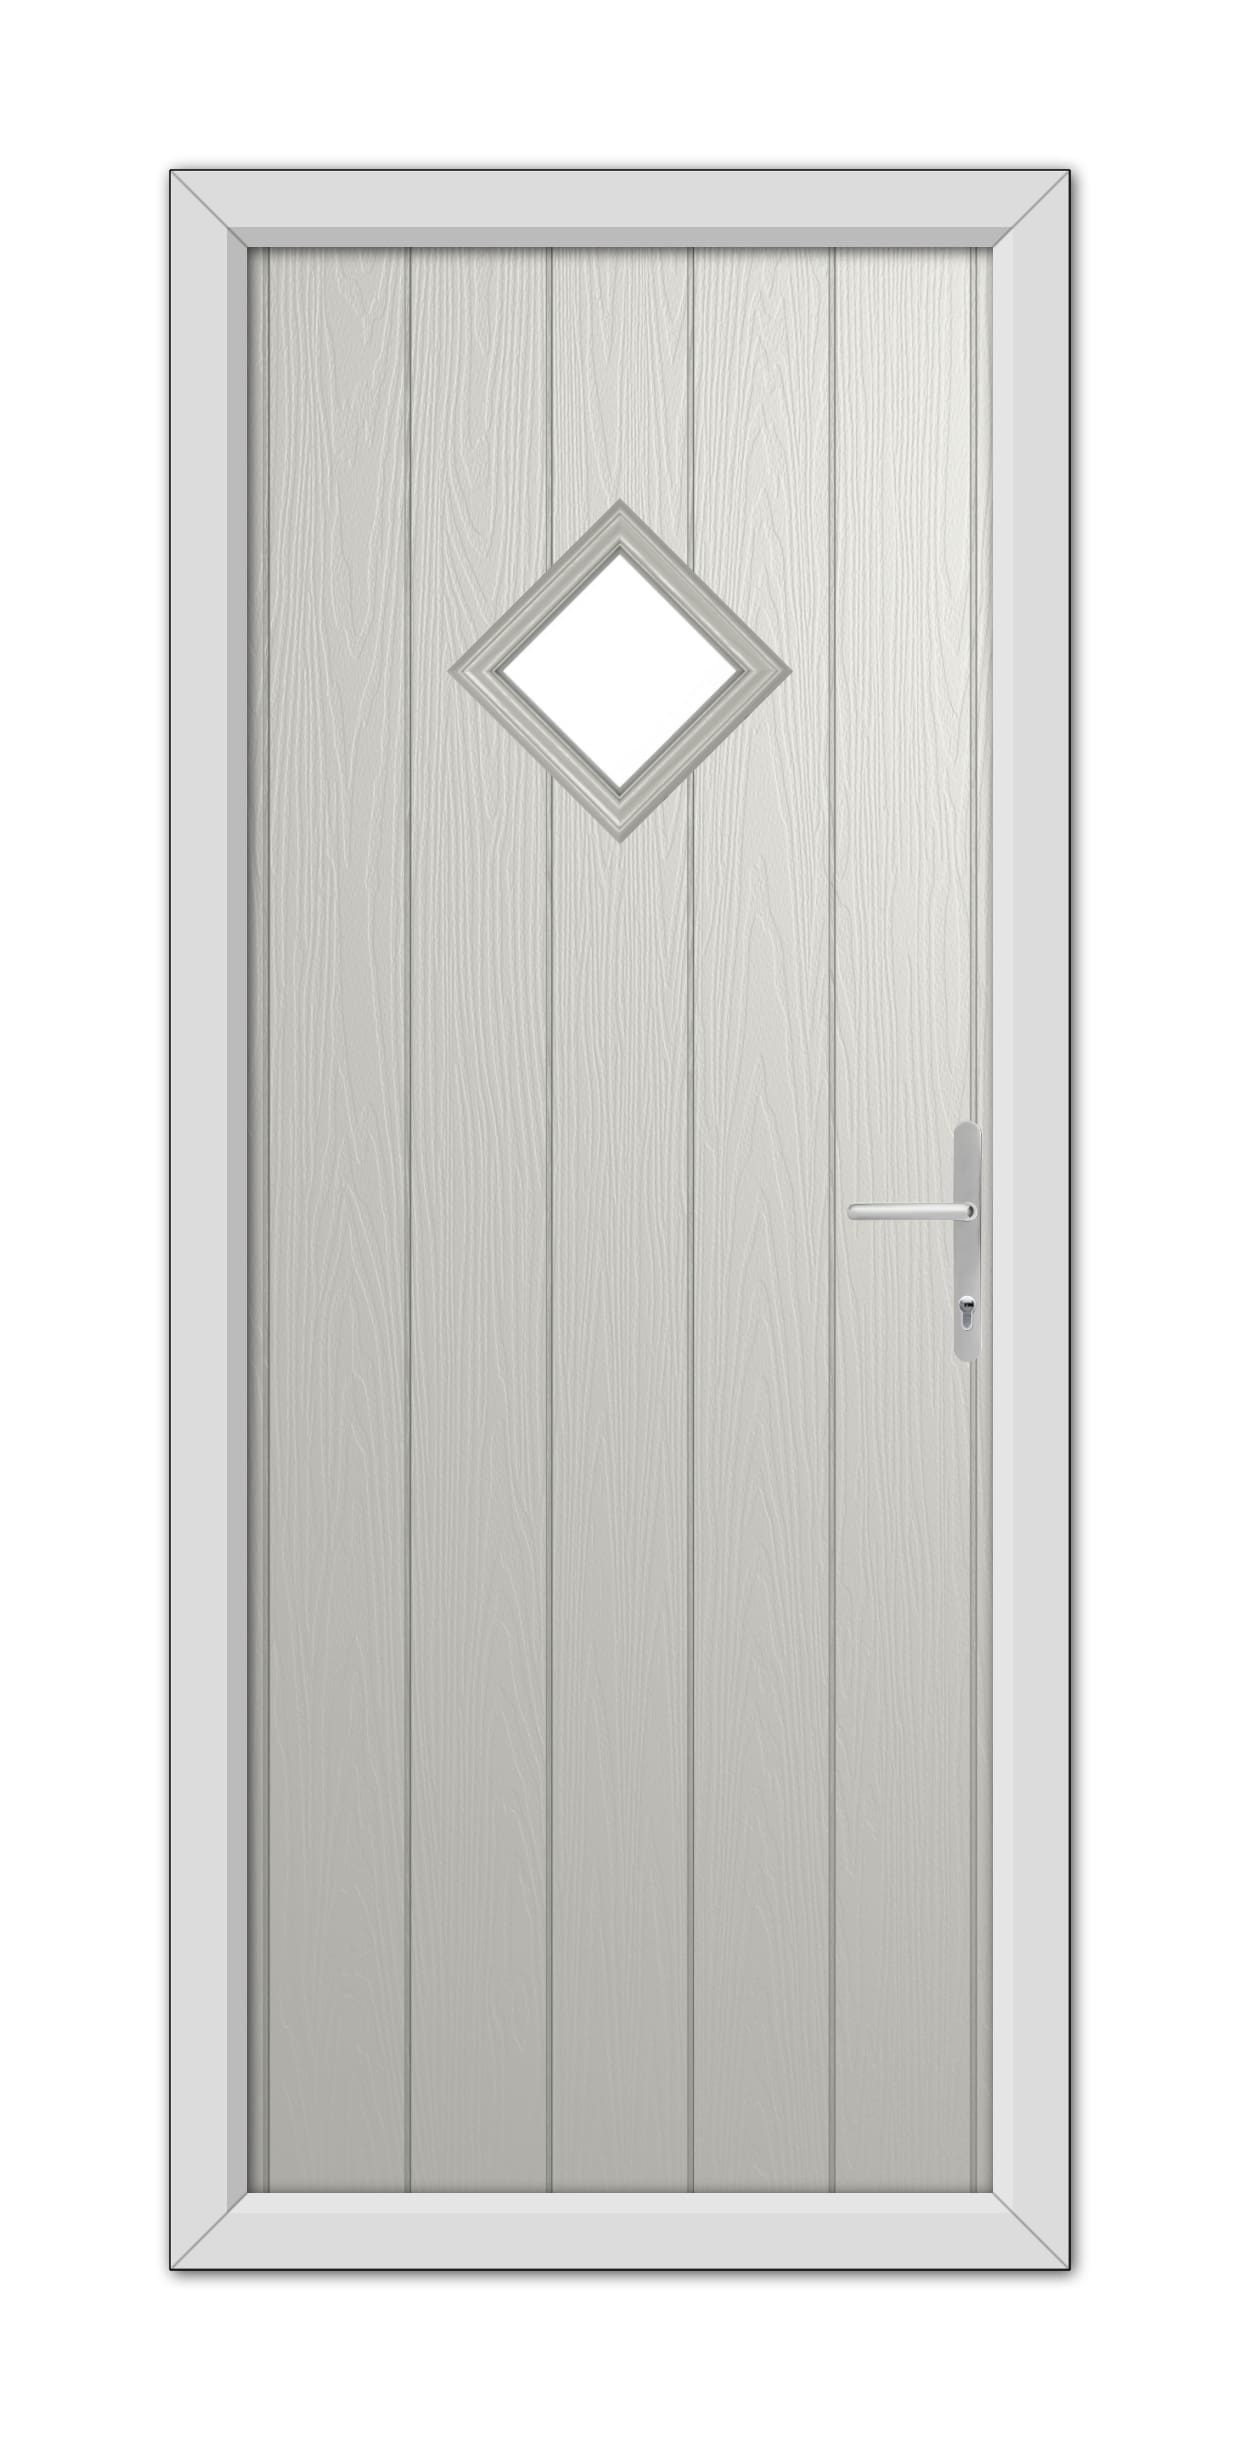 A modern Agate Grey Cornwall Composite Door 48mm Timber Core featuring vertical panels, a small diamond-shaped window at the top, and a metallic handle.